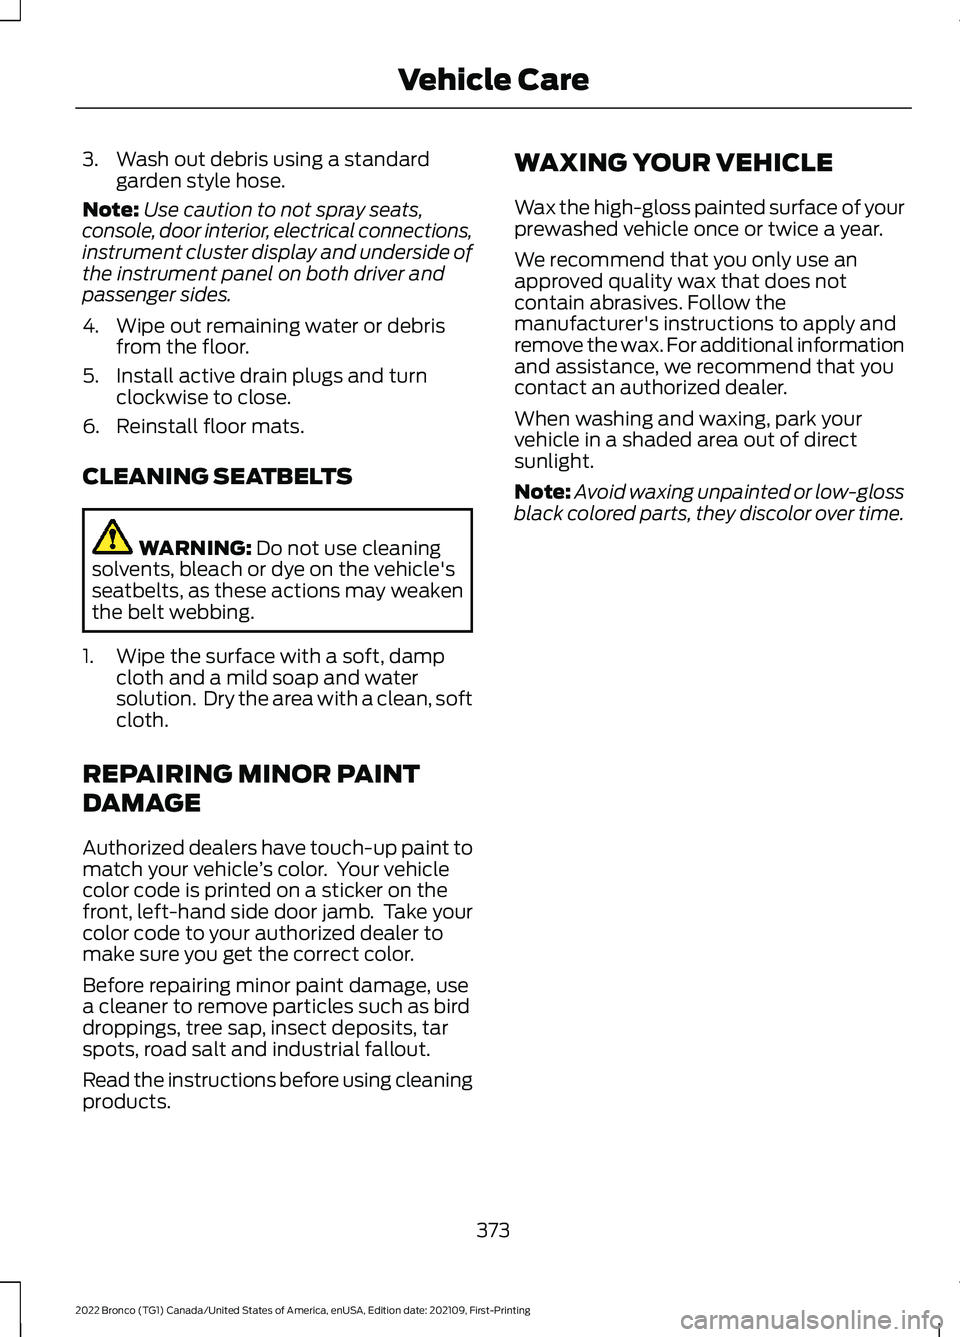 FORD BRONCO 2022  Owners Manual 3.Wash out debris using a standardgarden style hose.
Note:Use caution to not spray seats,console, door interior, electrical connections,instrument cluster display and underside ofthe instrument panel 